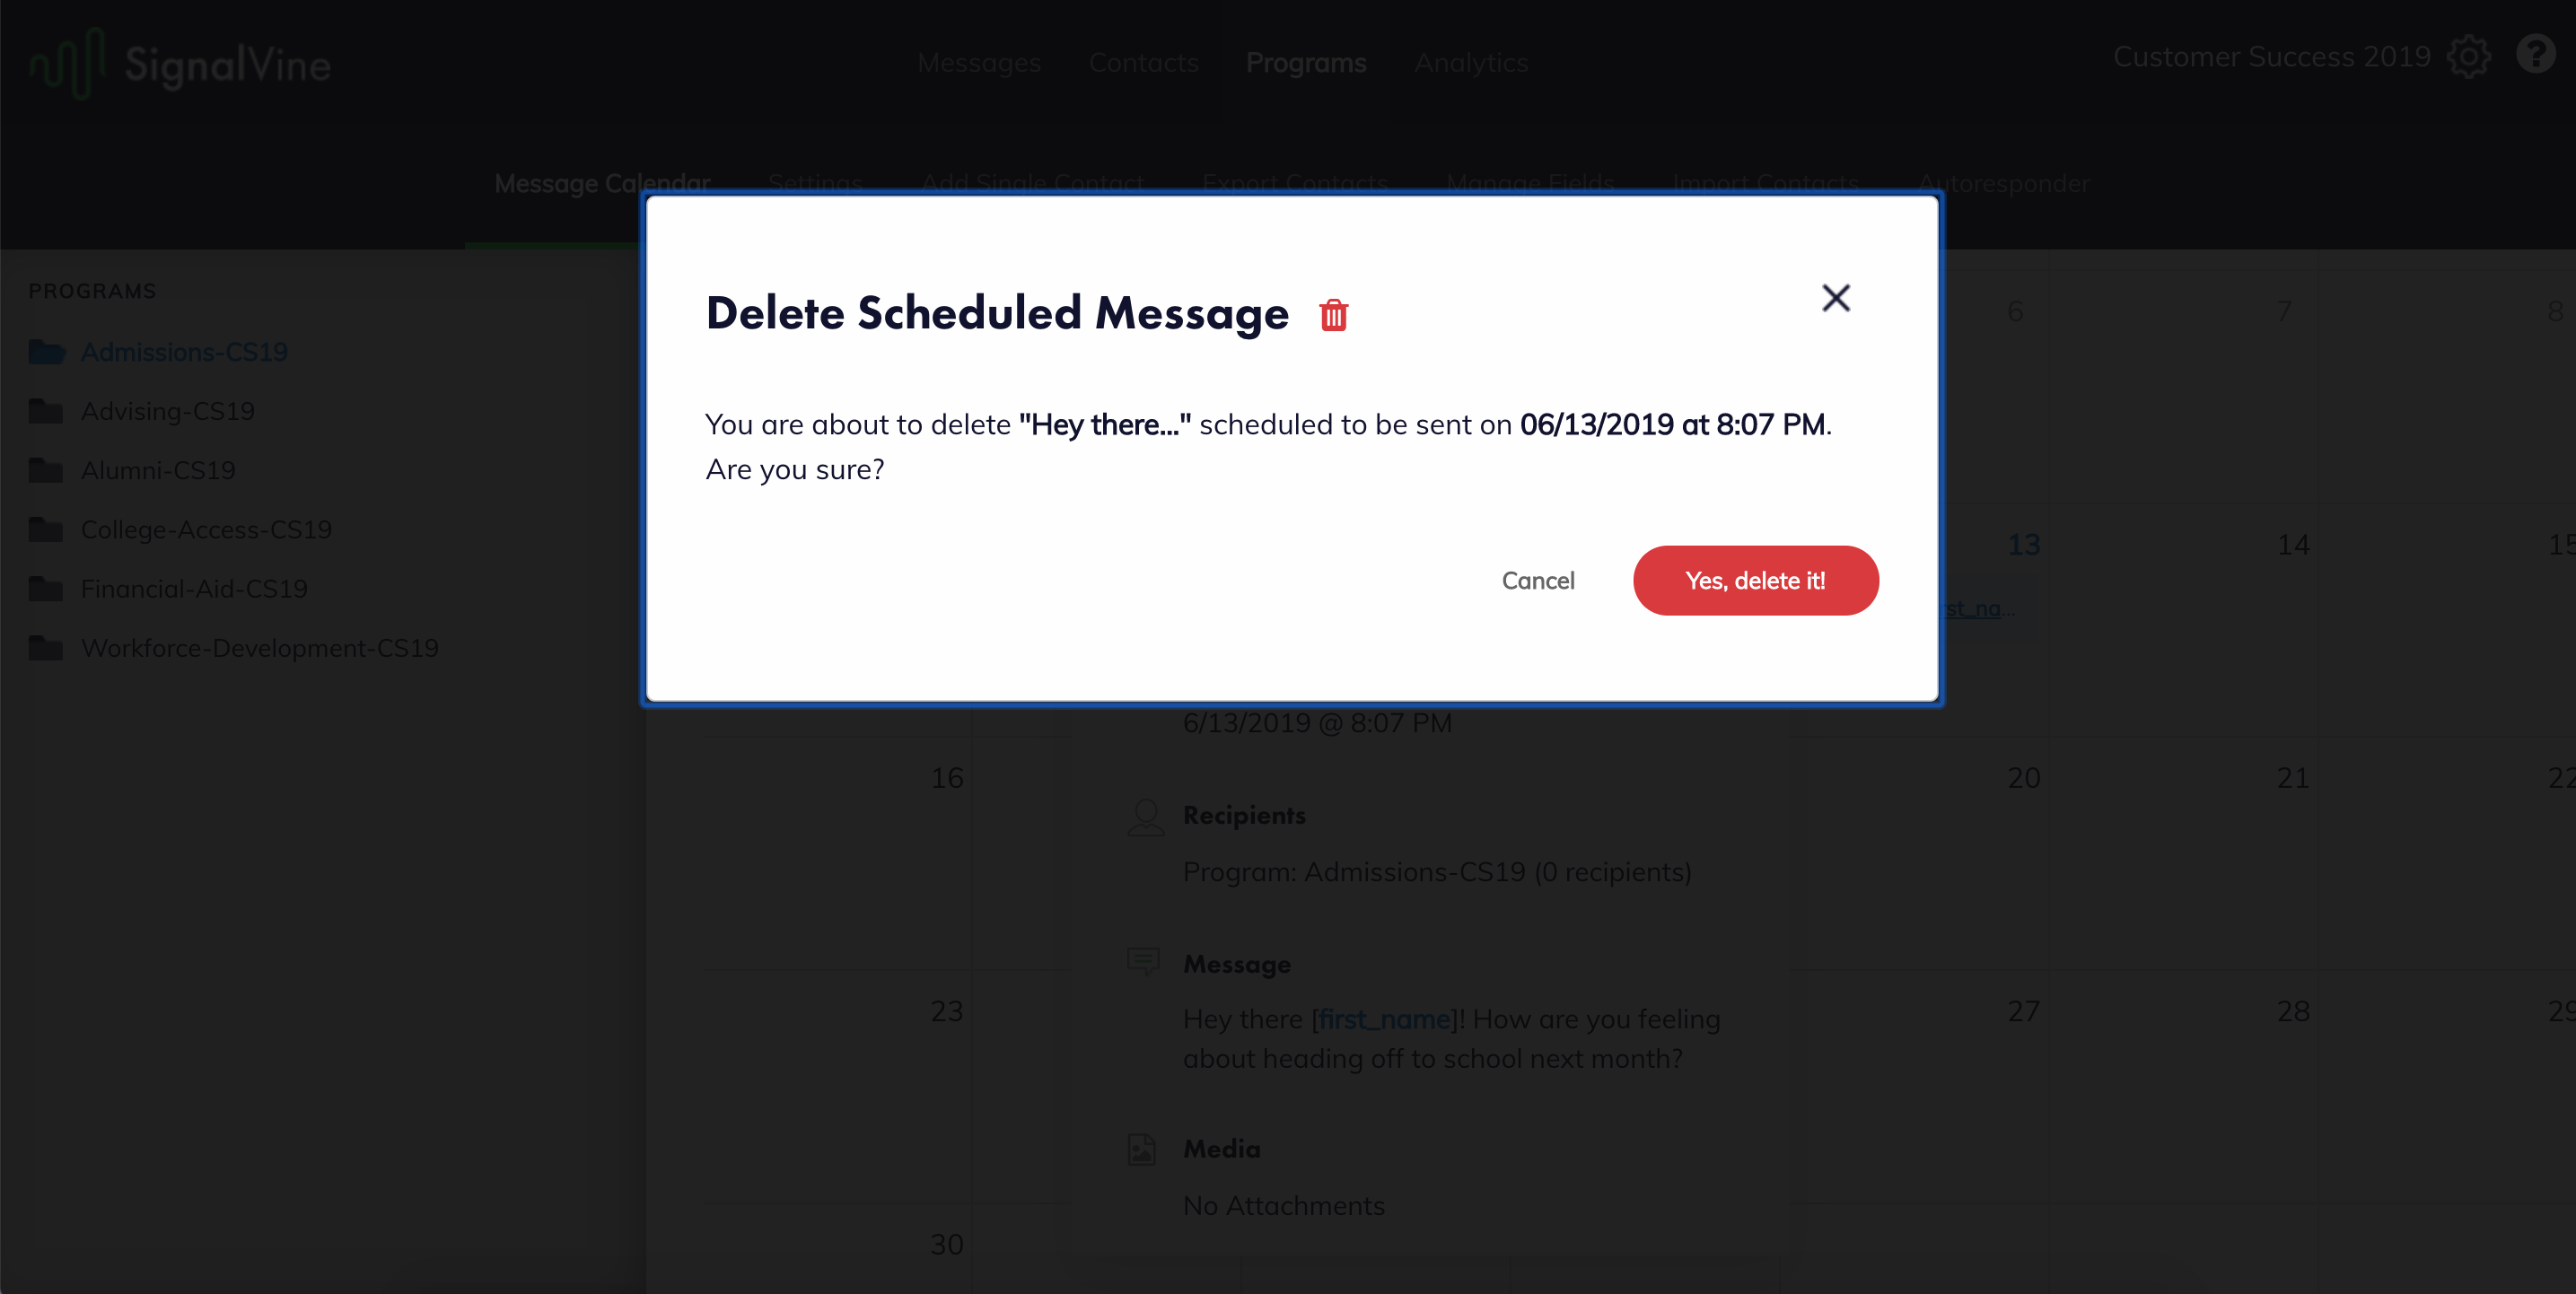 image of confirmation page to affirm intent to delete message